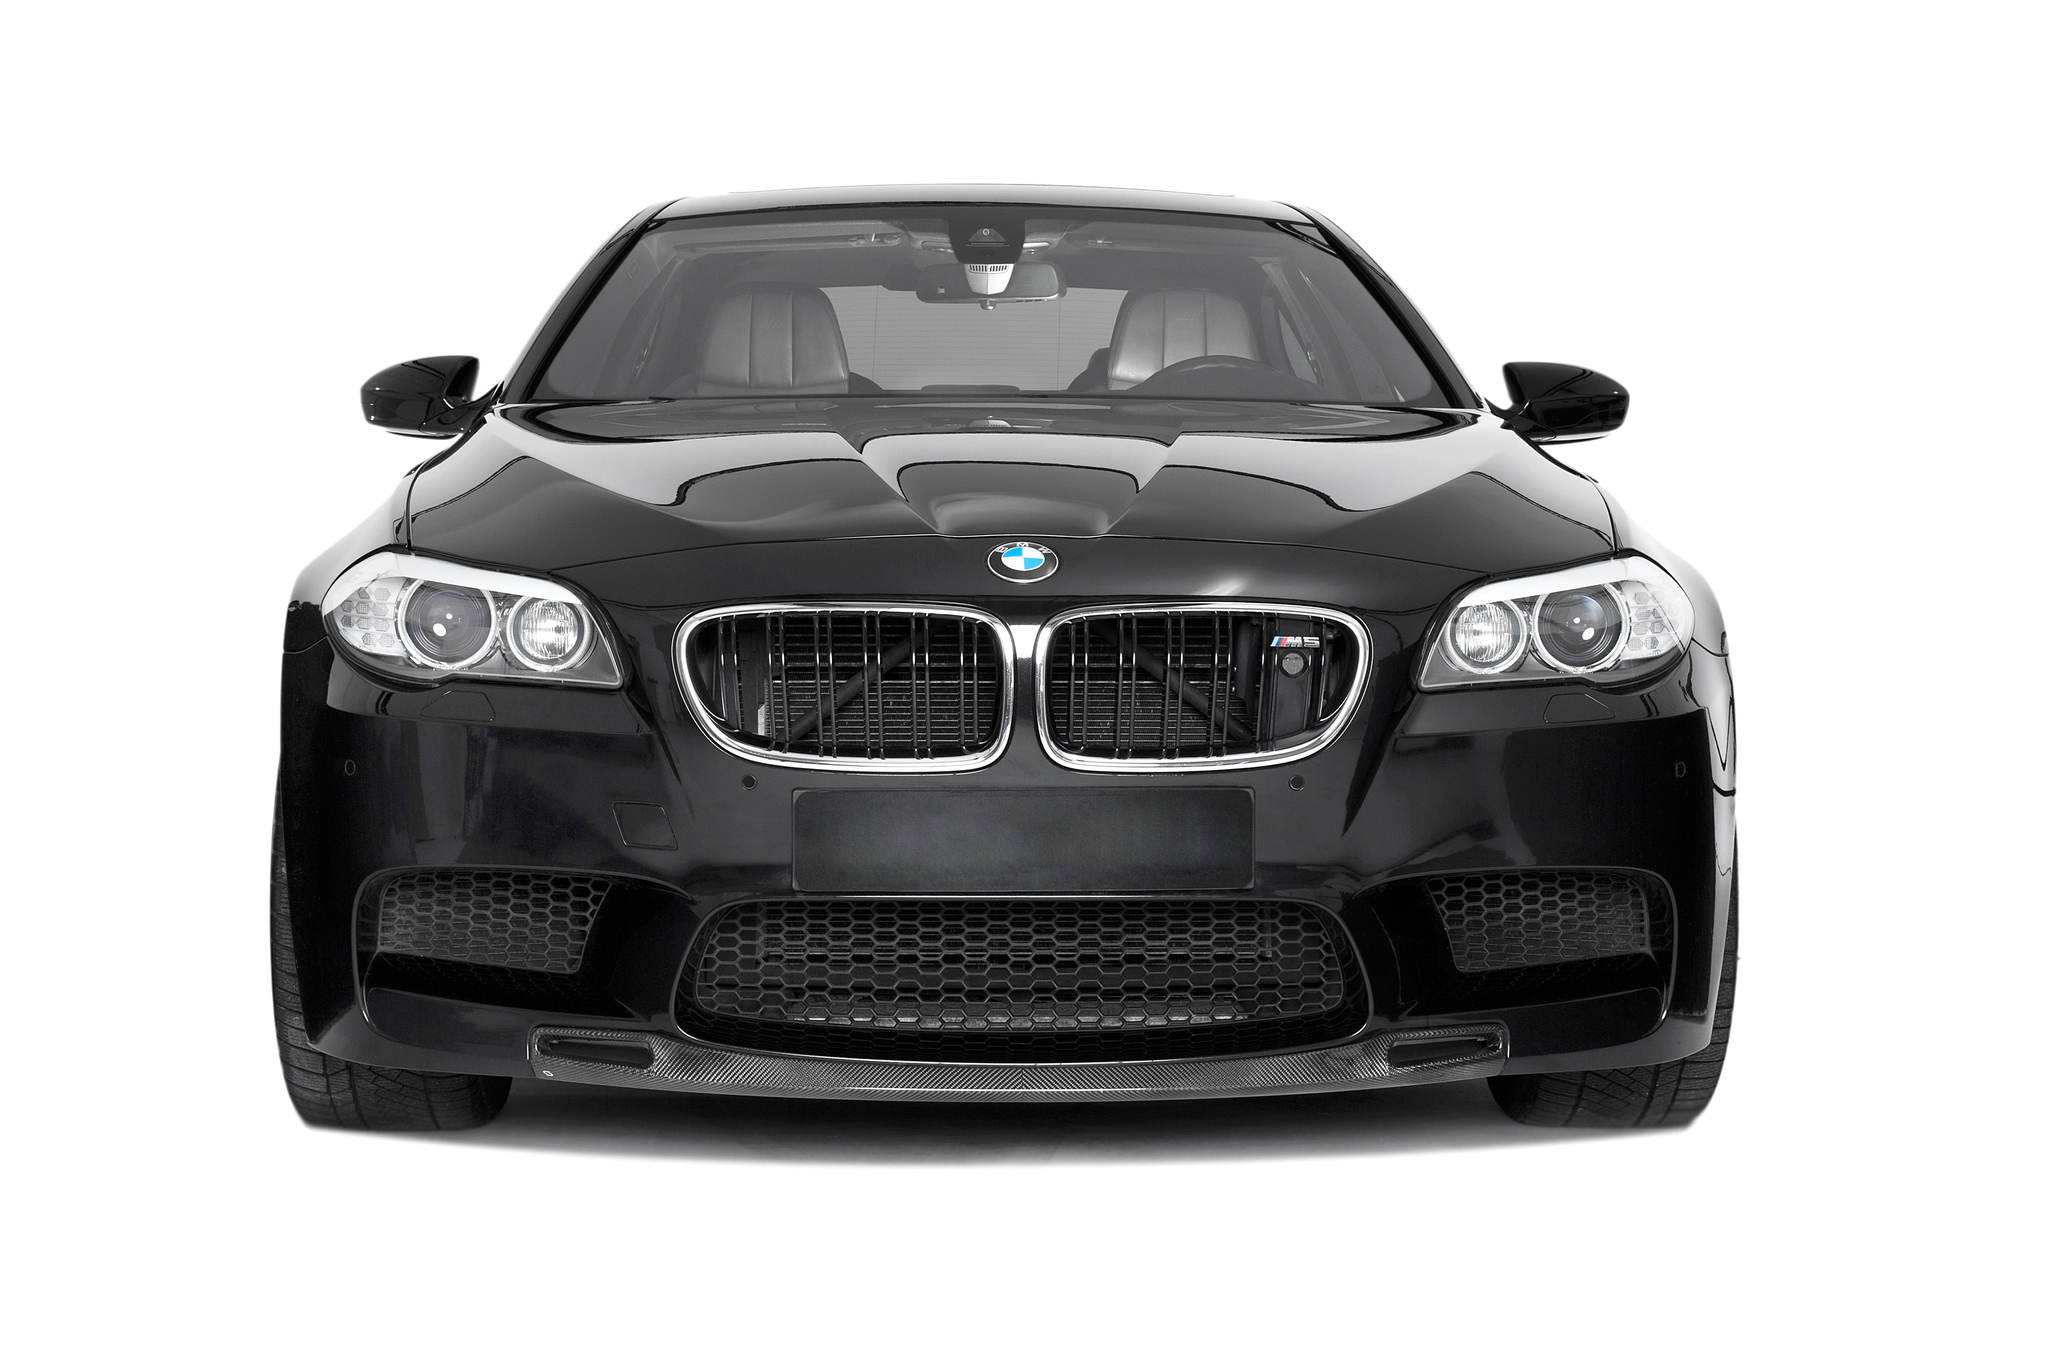 Sterckenn Carbon Fiber front lip for BMW M5 F10 new style